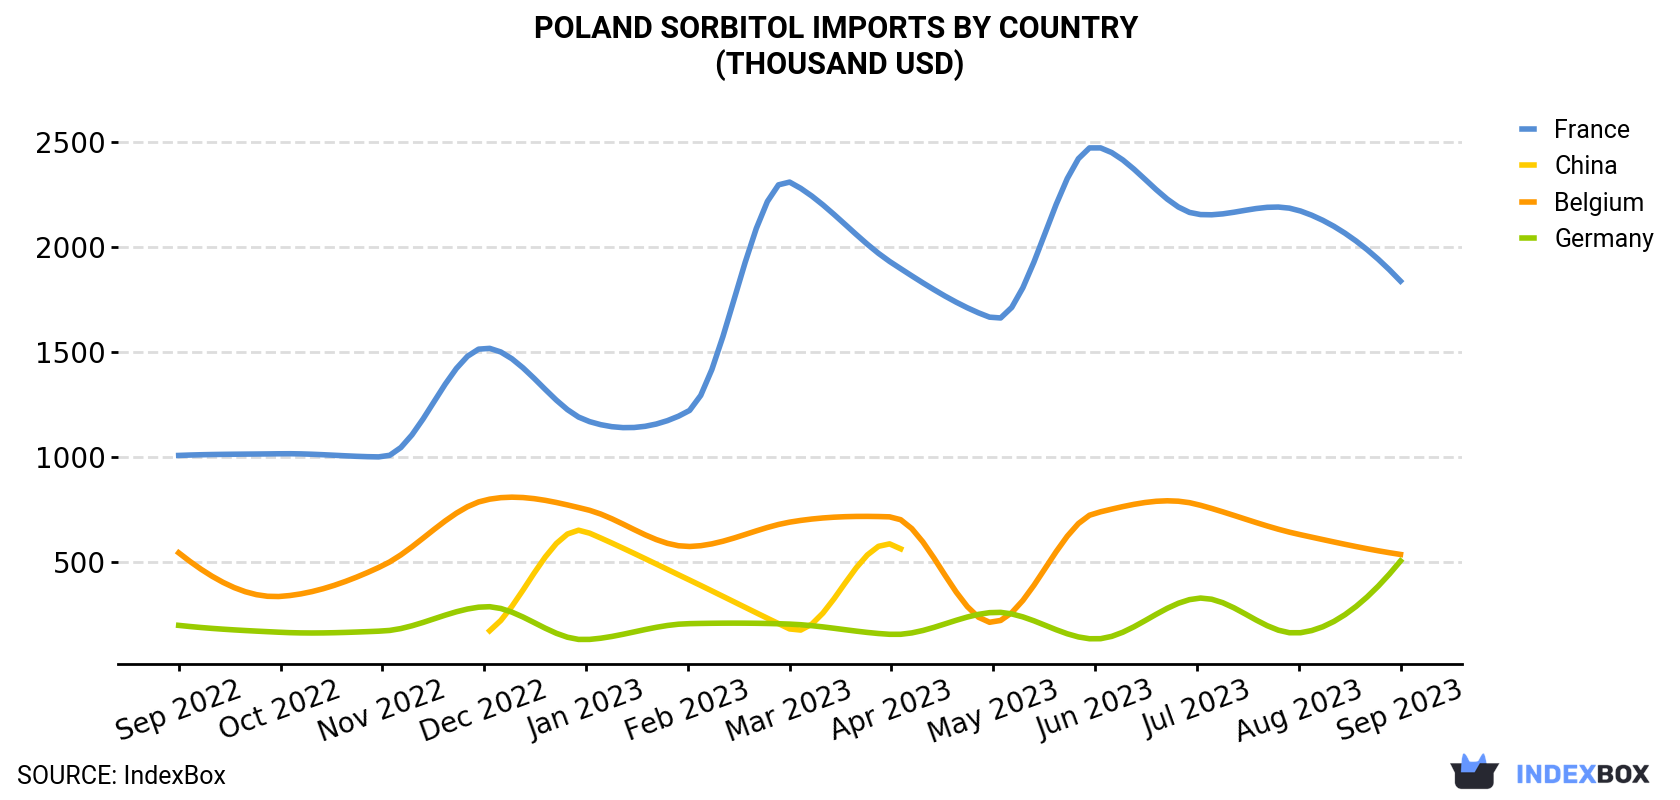 Poland Sorbitol Imports By Country (Thousand USD)